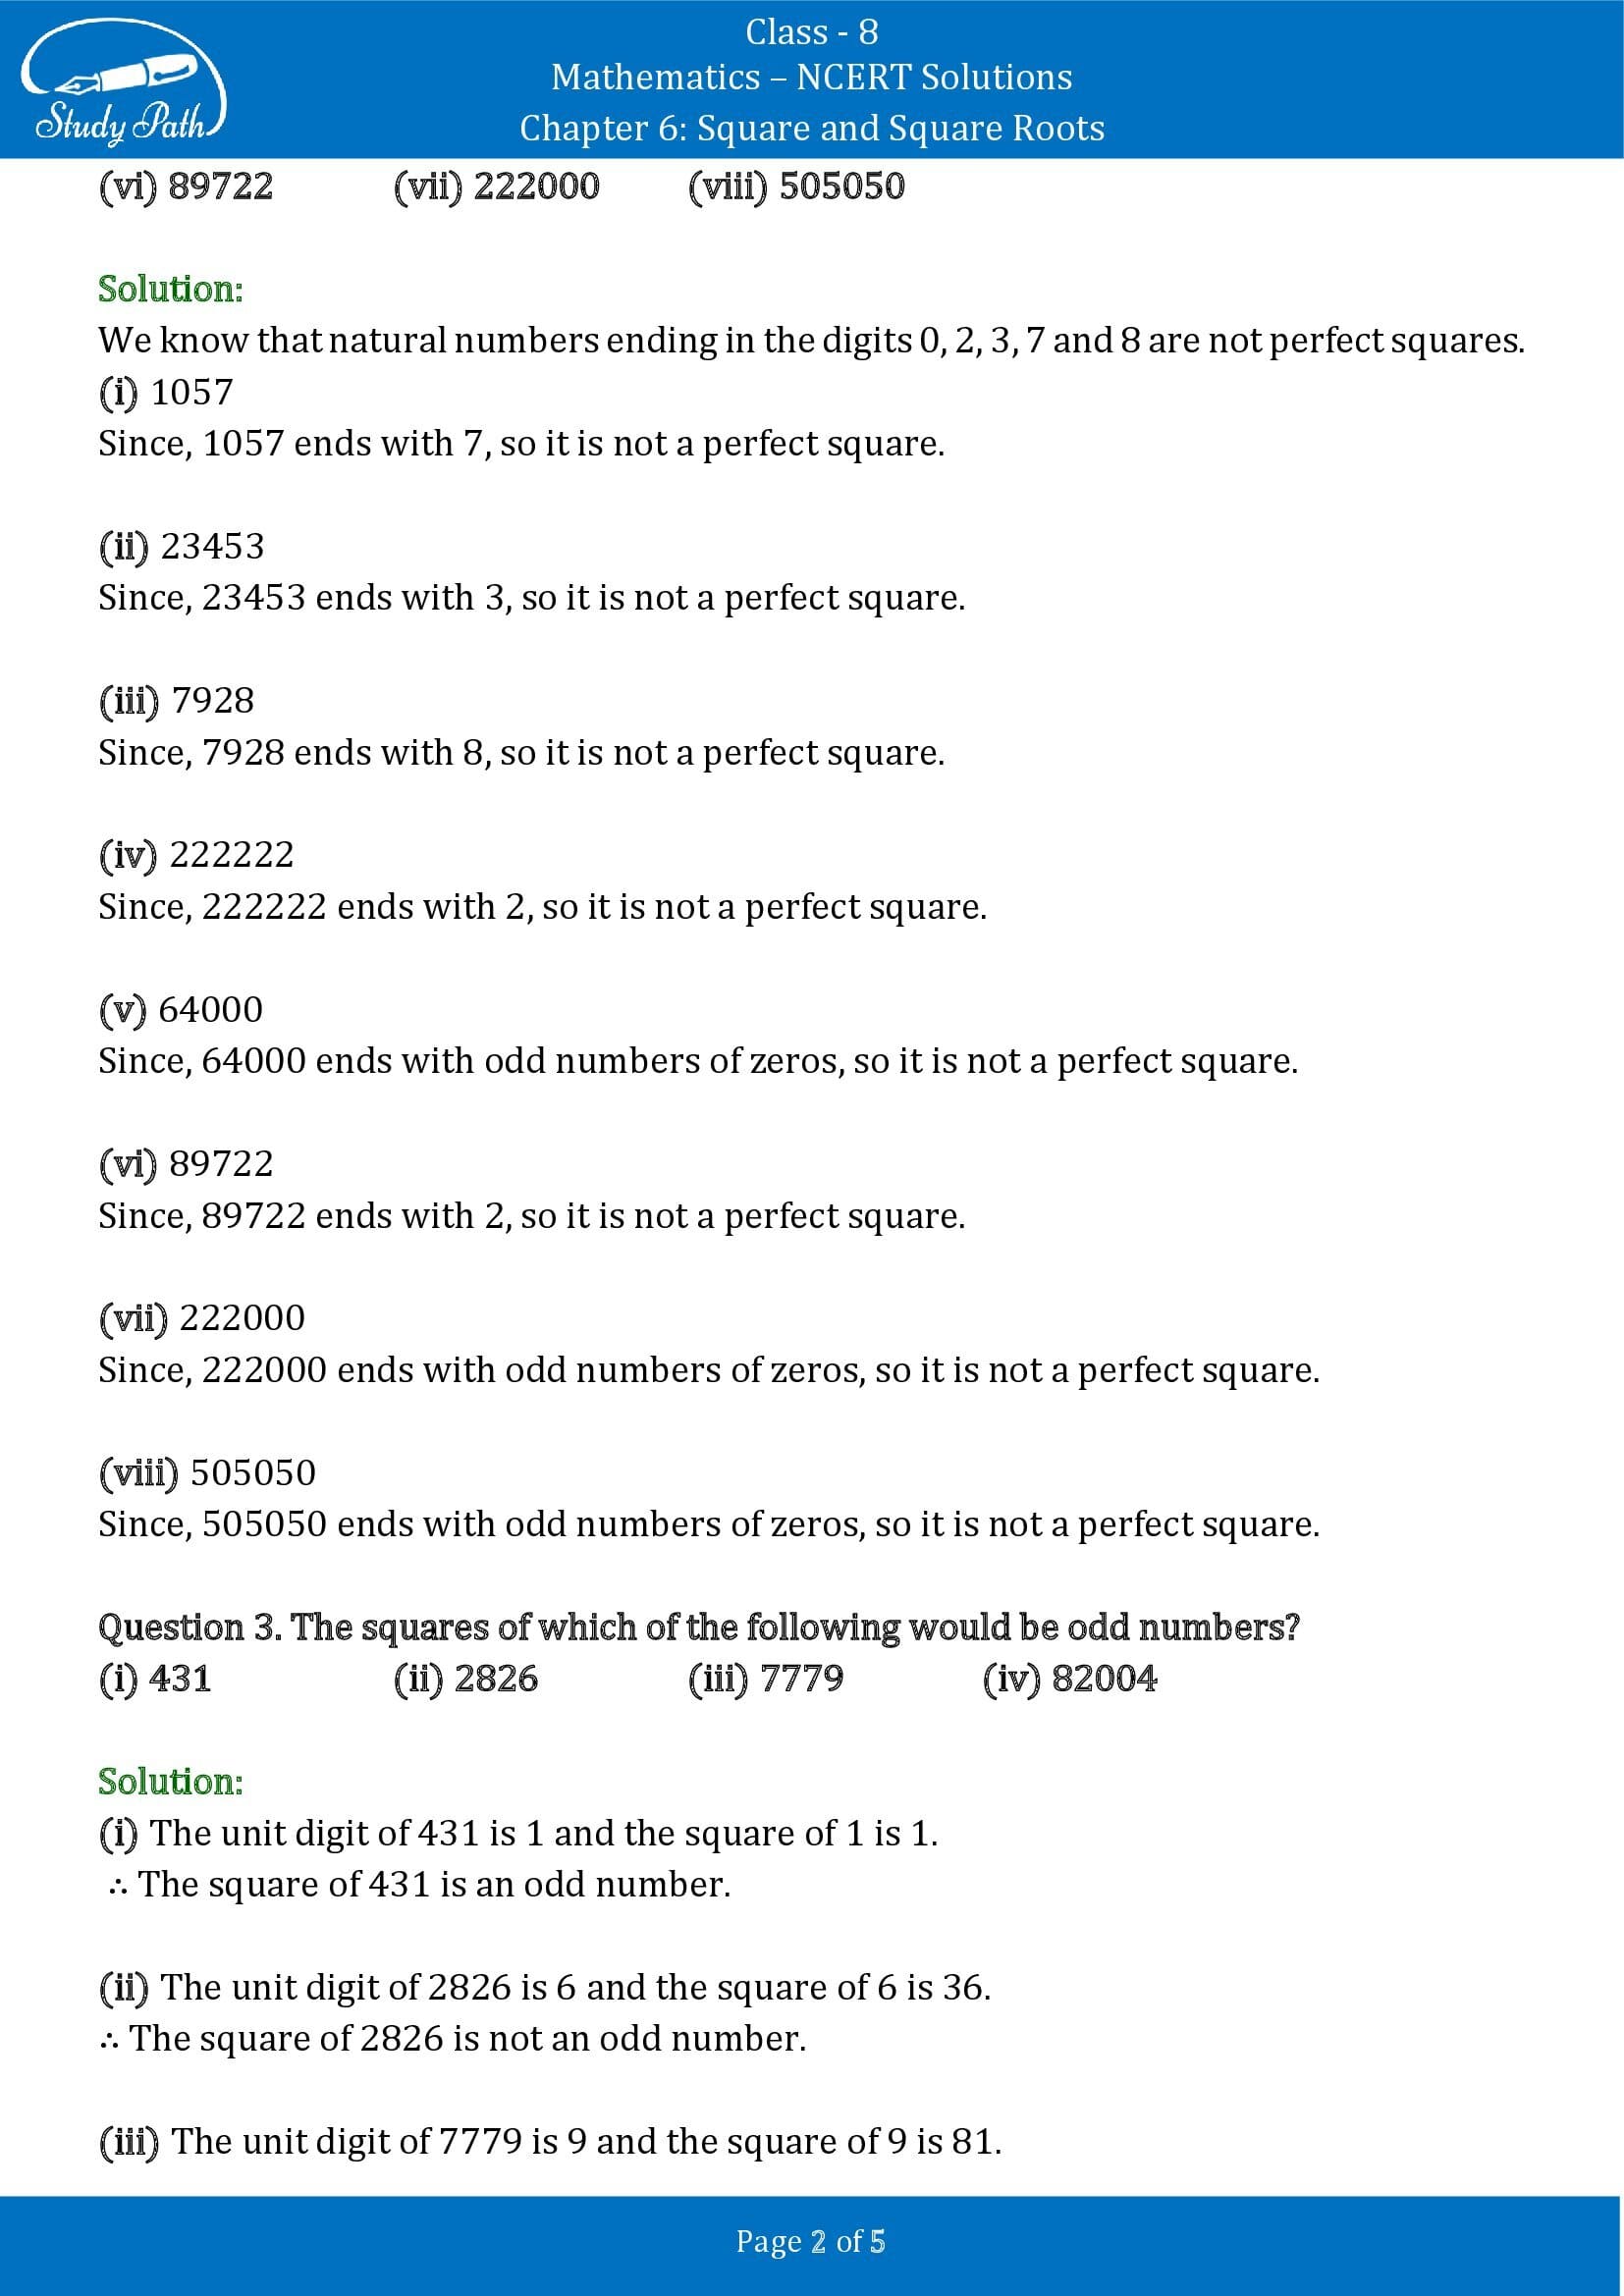 NCERT Solutions for Class 8 Maths Chapter 6 Square and Square Roots Exercise 6.1 00002